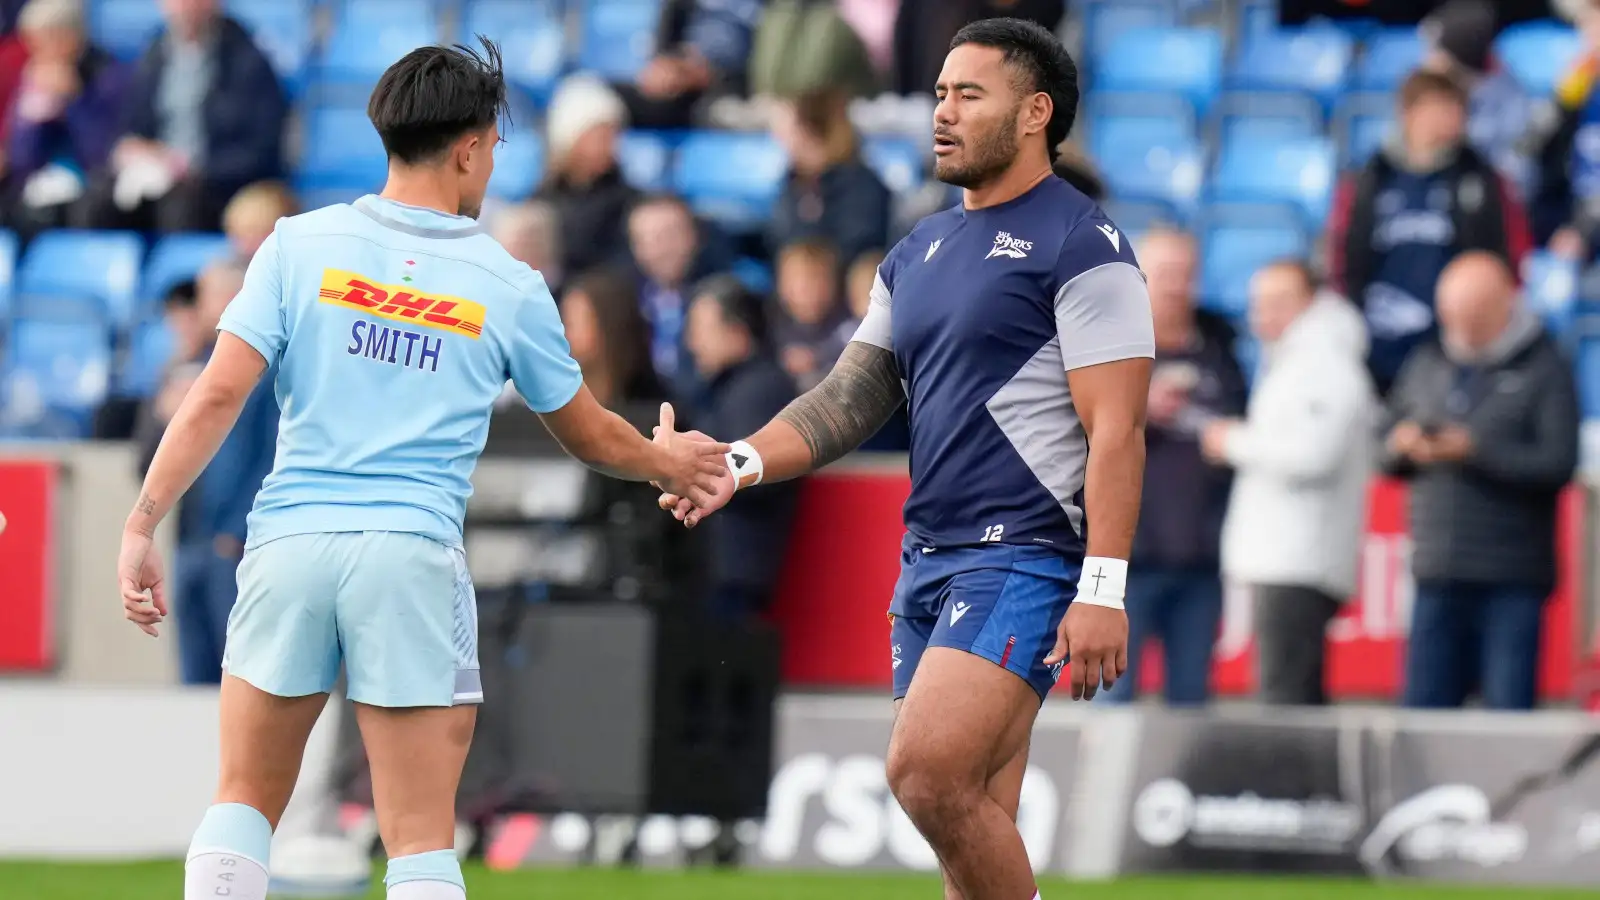 England's Marcus Smtih and Manu Tuilagi greet each other before Harlequins v Sale Sharks clash in the Premiership.